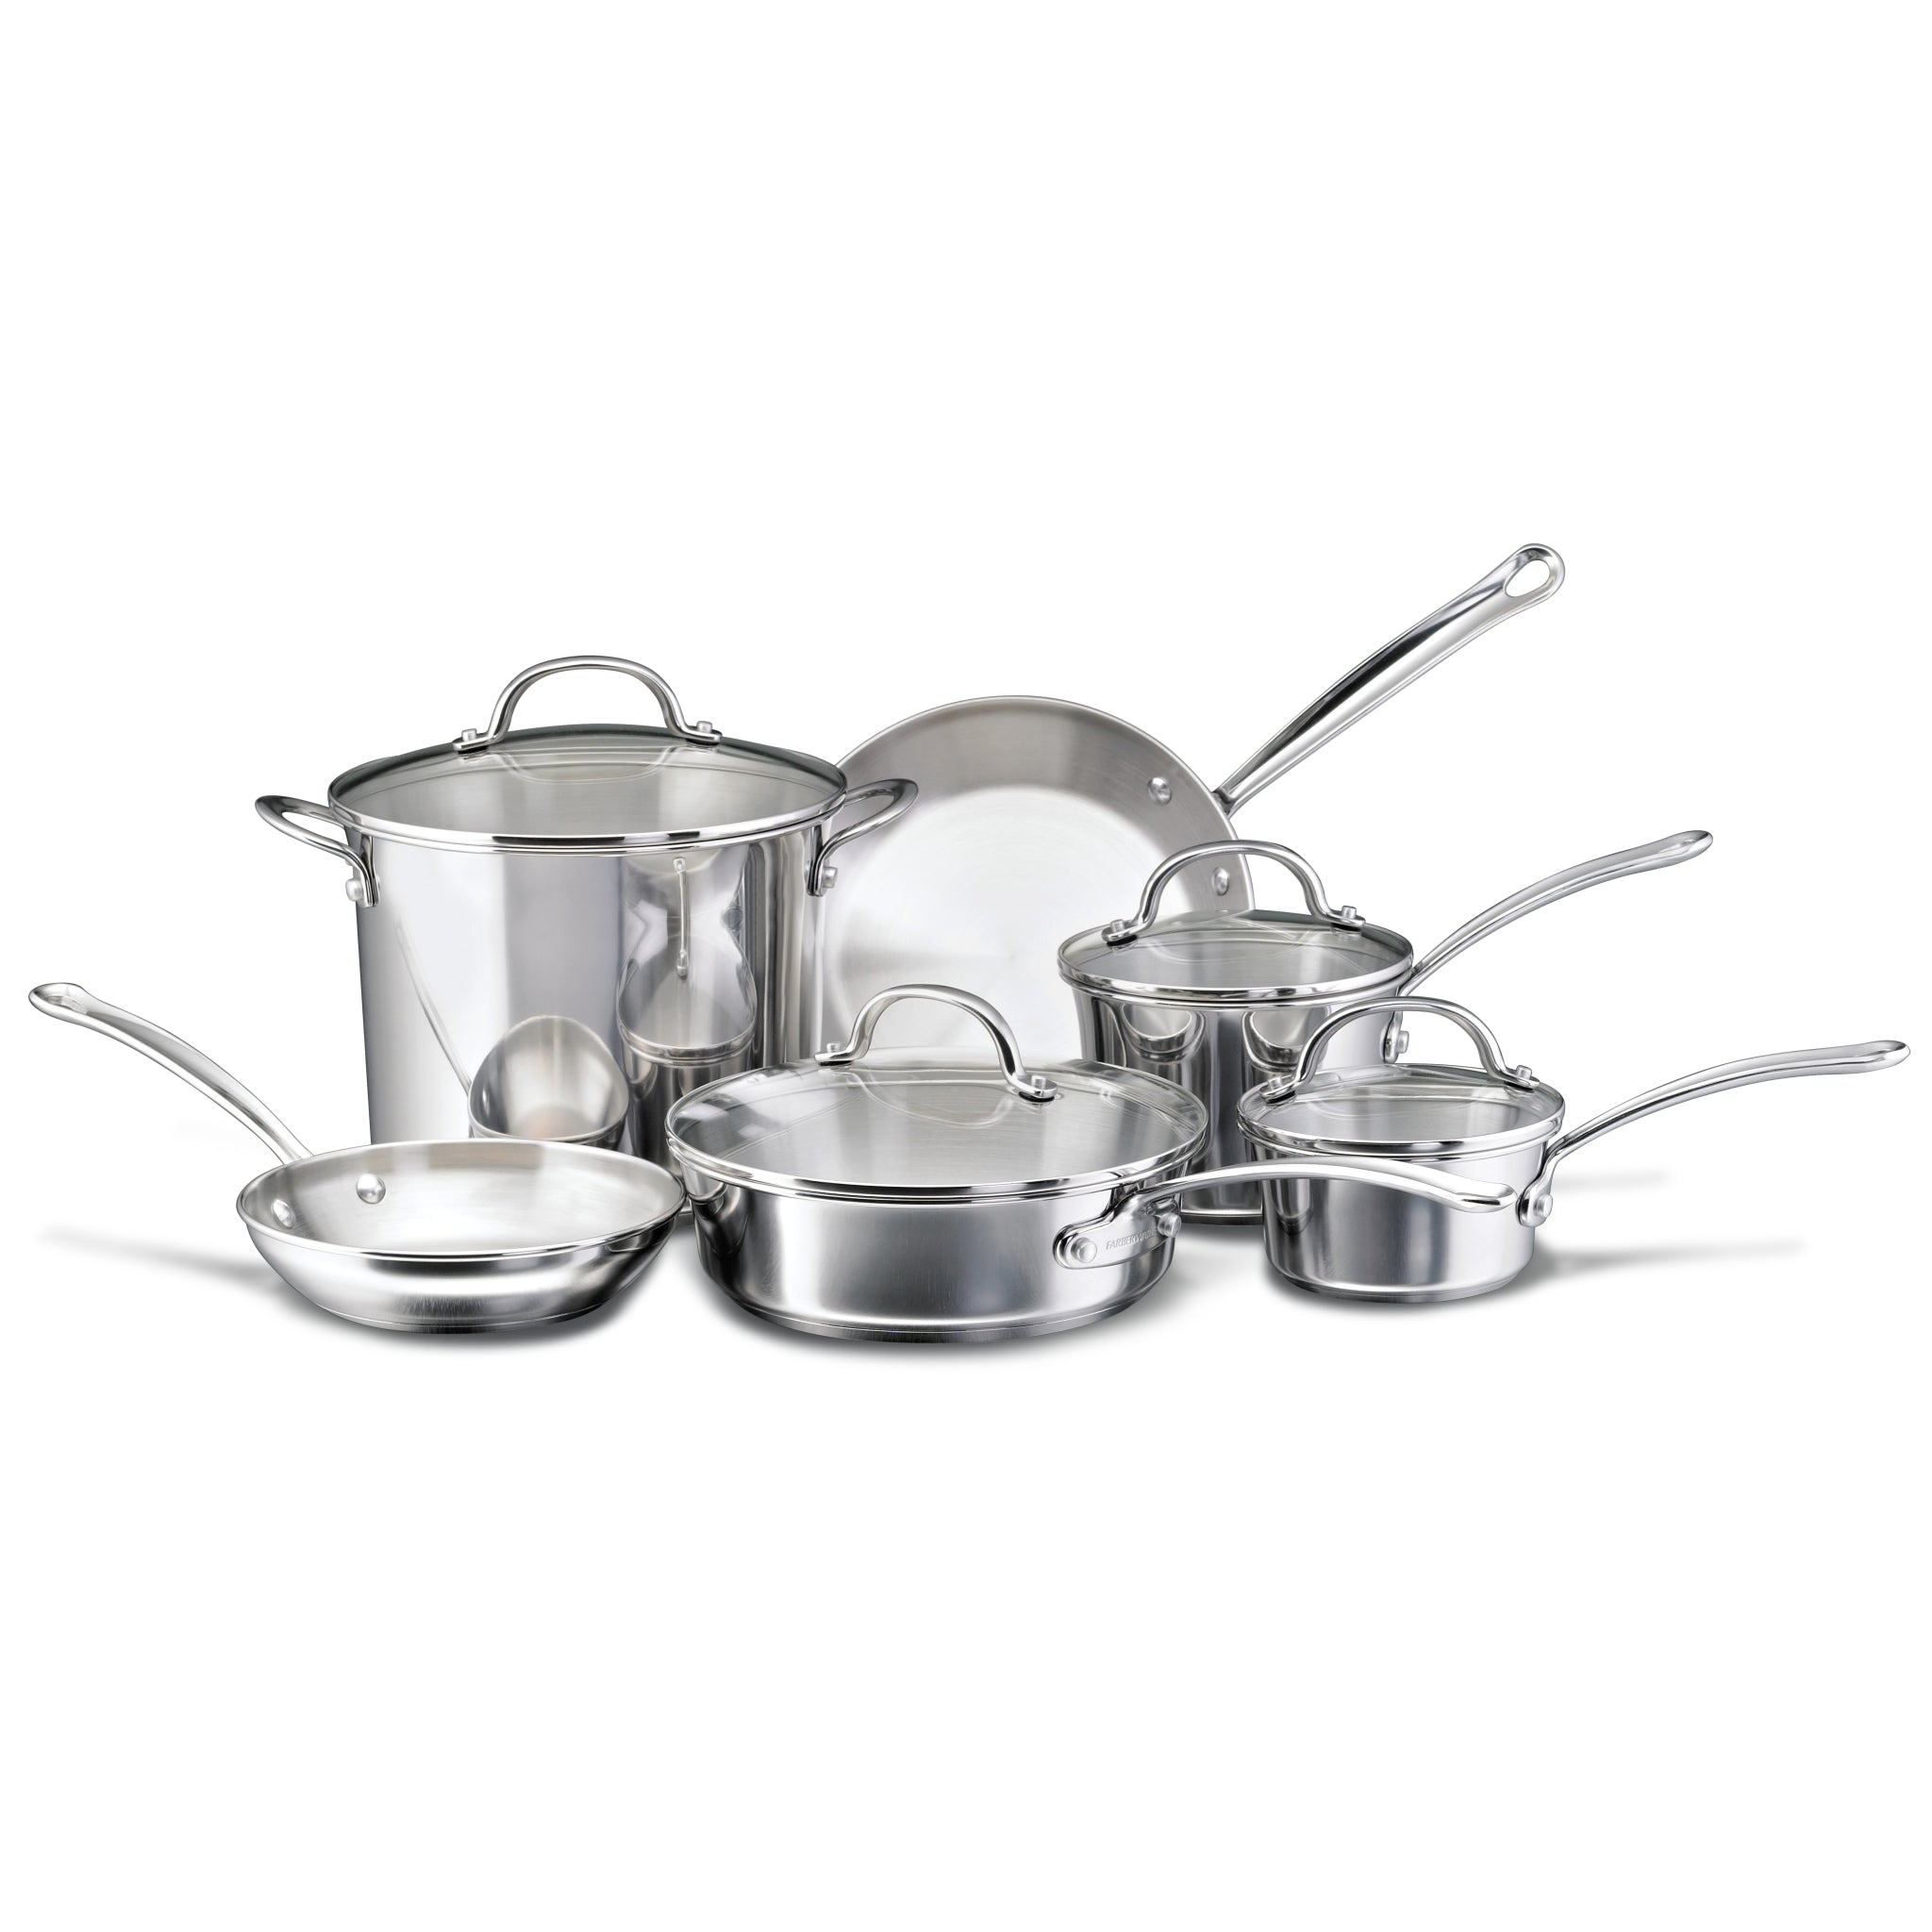 Farberware 10-Piece Aqua 120 Limited Edition Stainless Steel